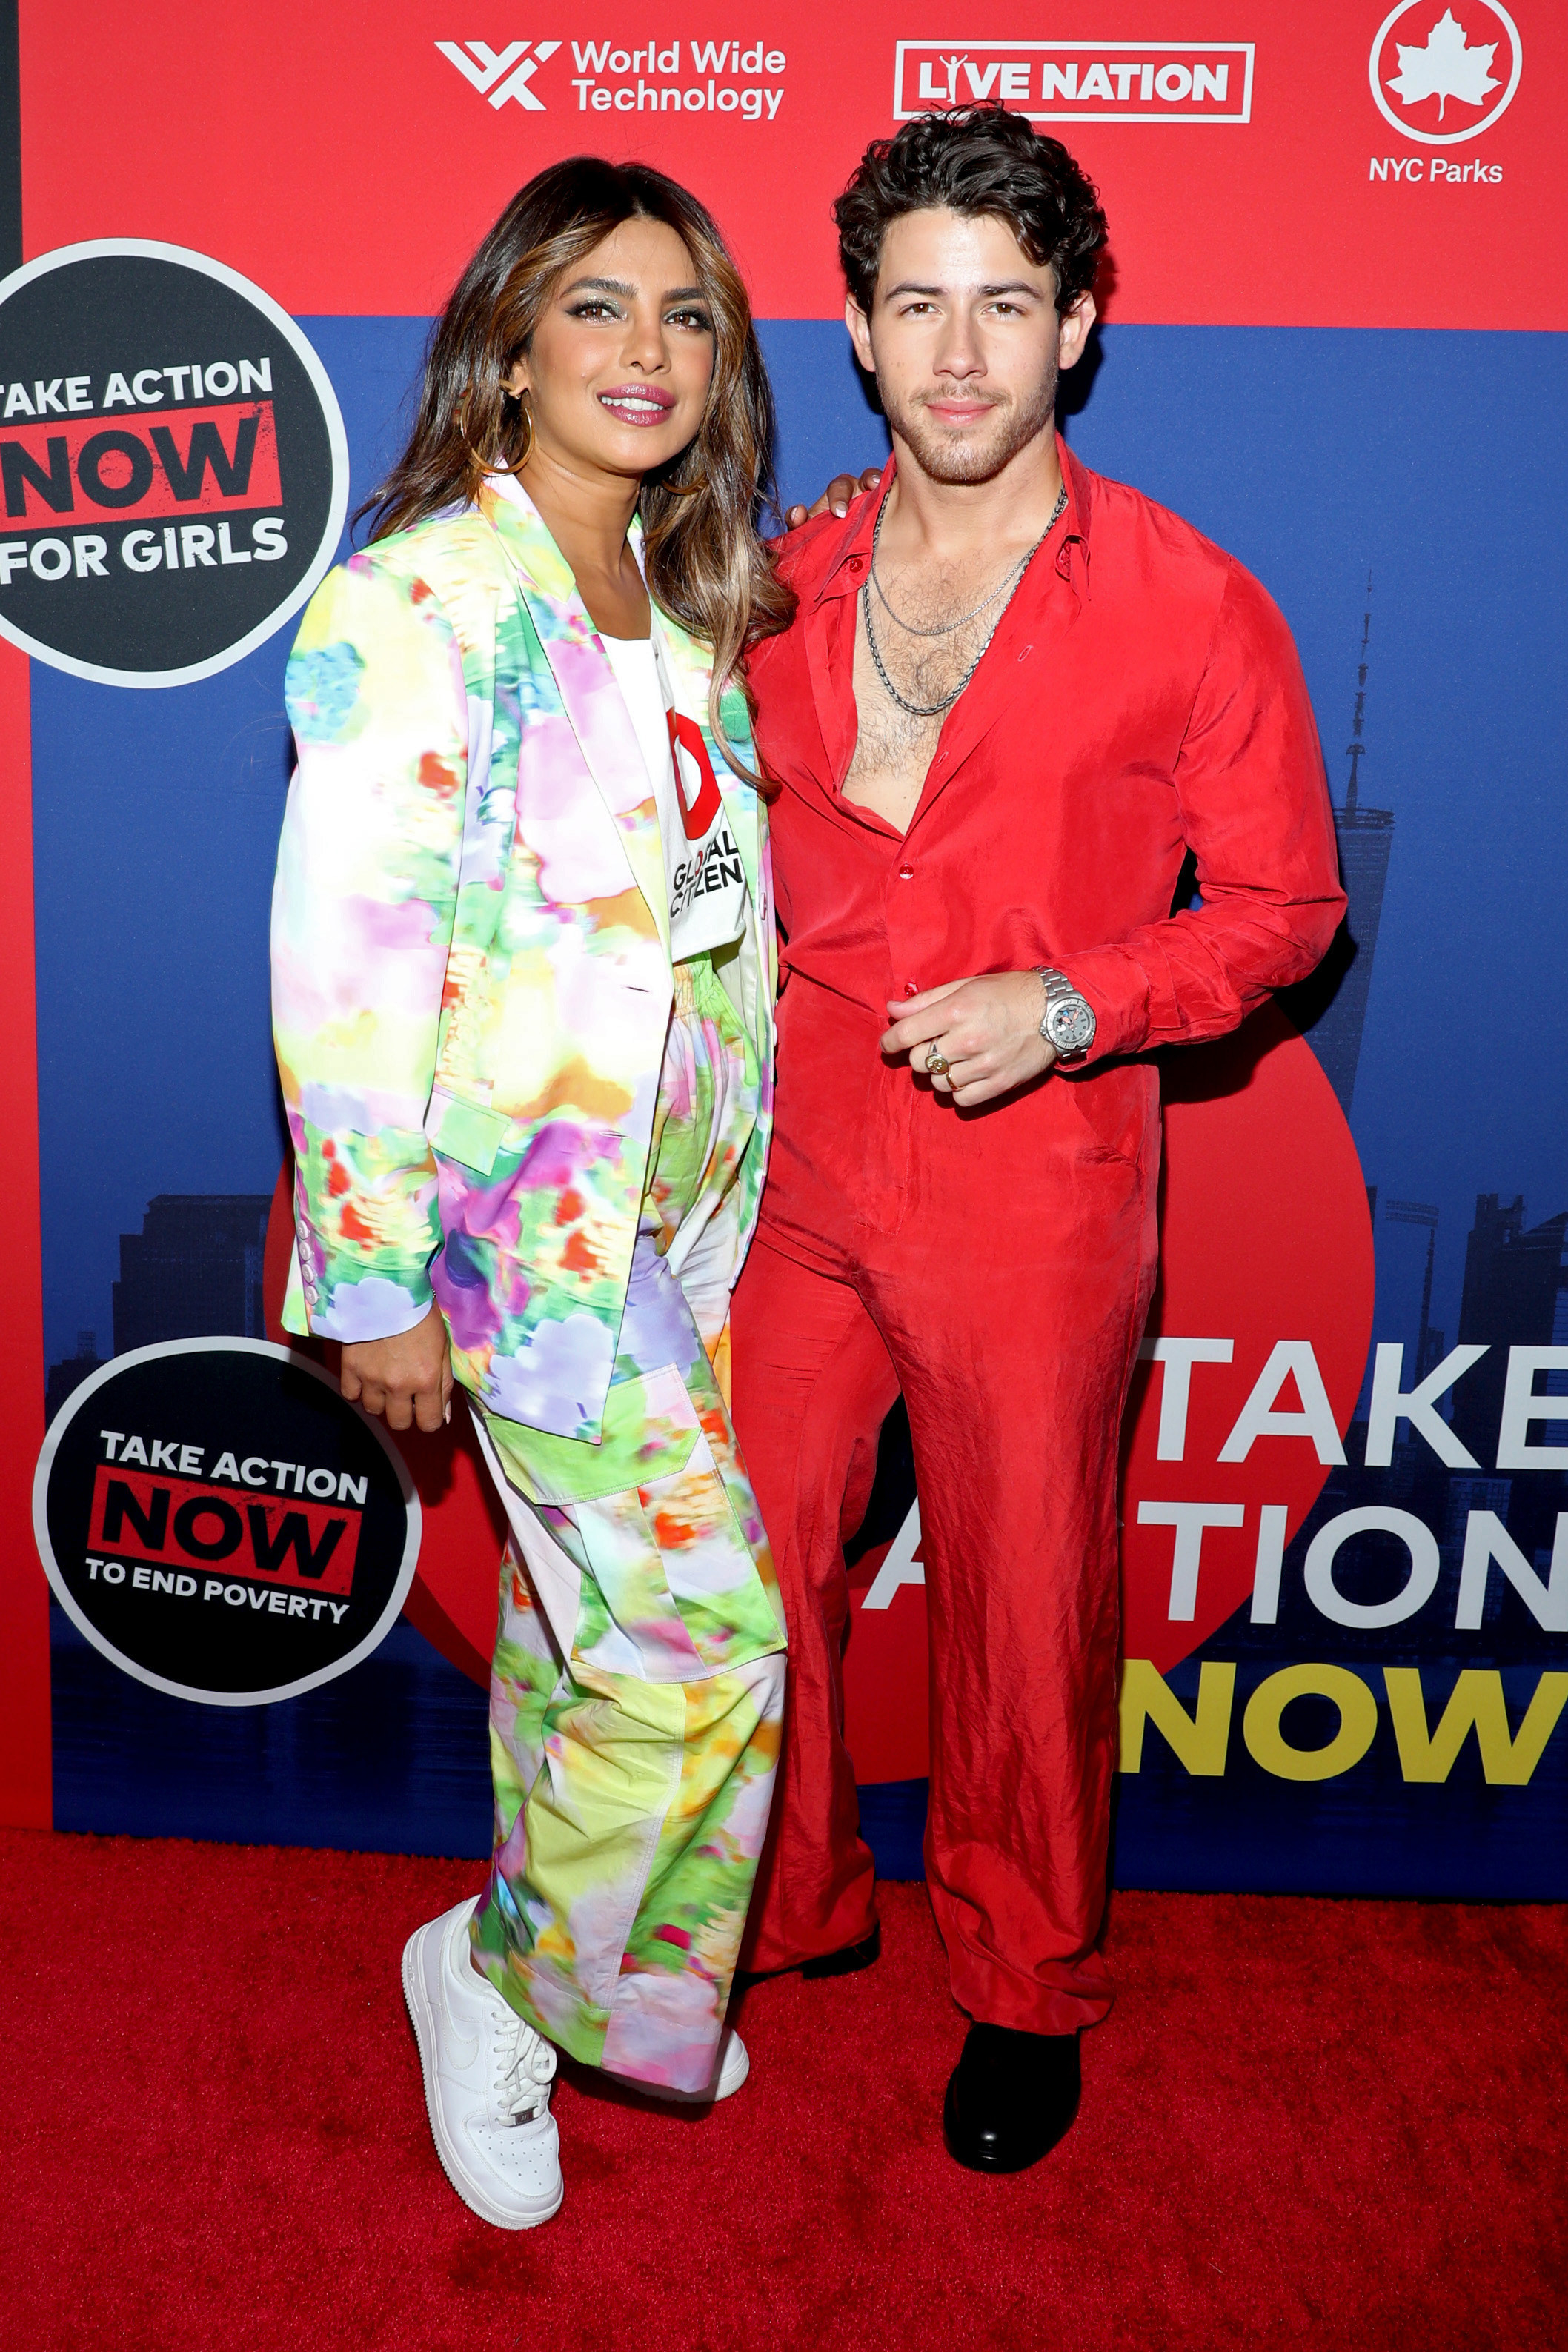 Priyanka and Nick pose together for a red carpet photo.